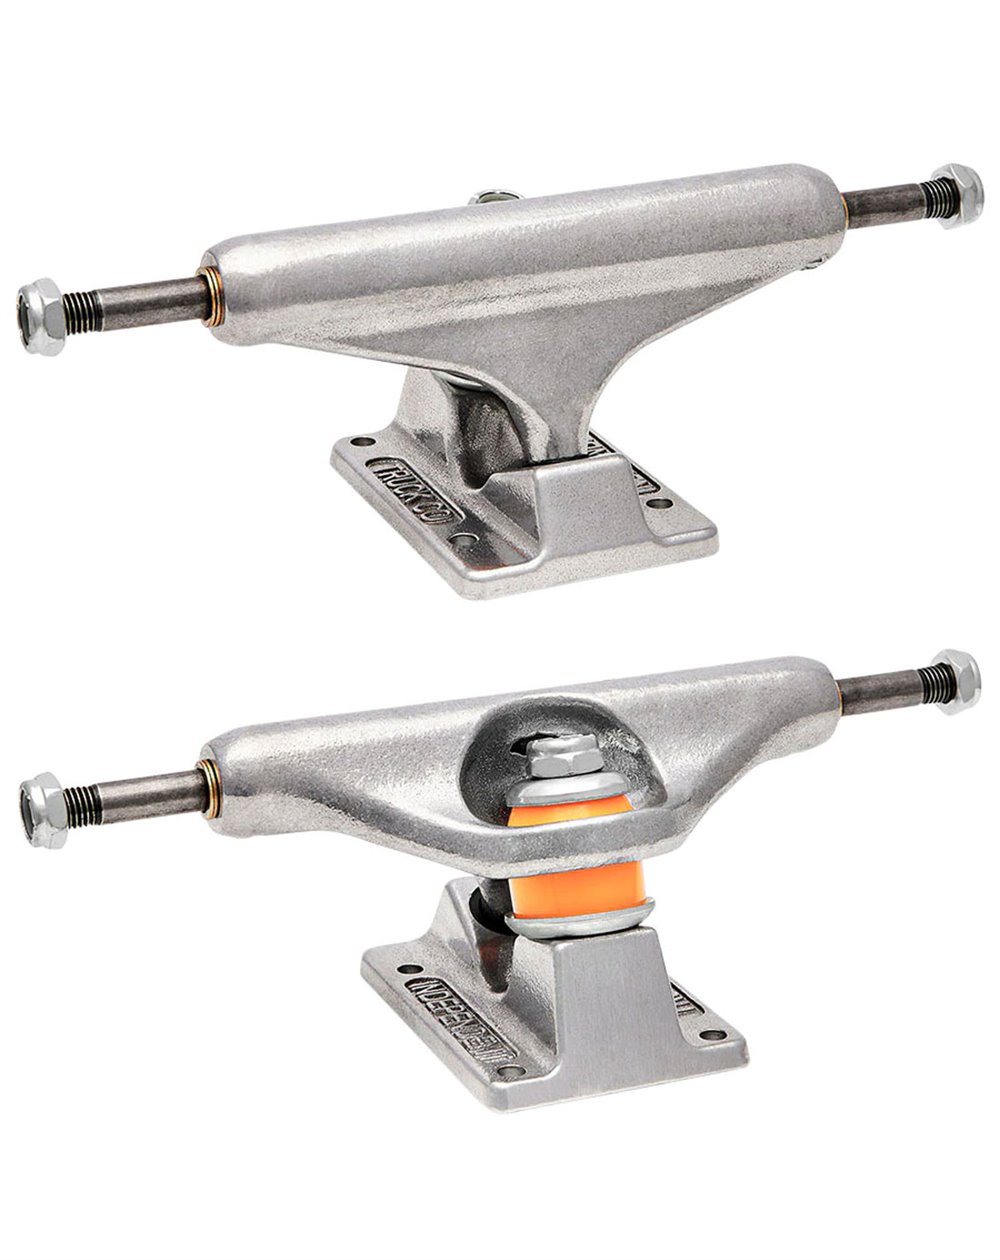 Independent Stage XI Hollow 139mm Skateboard Trucks pack of 2